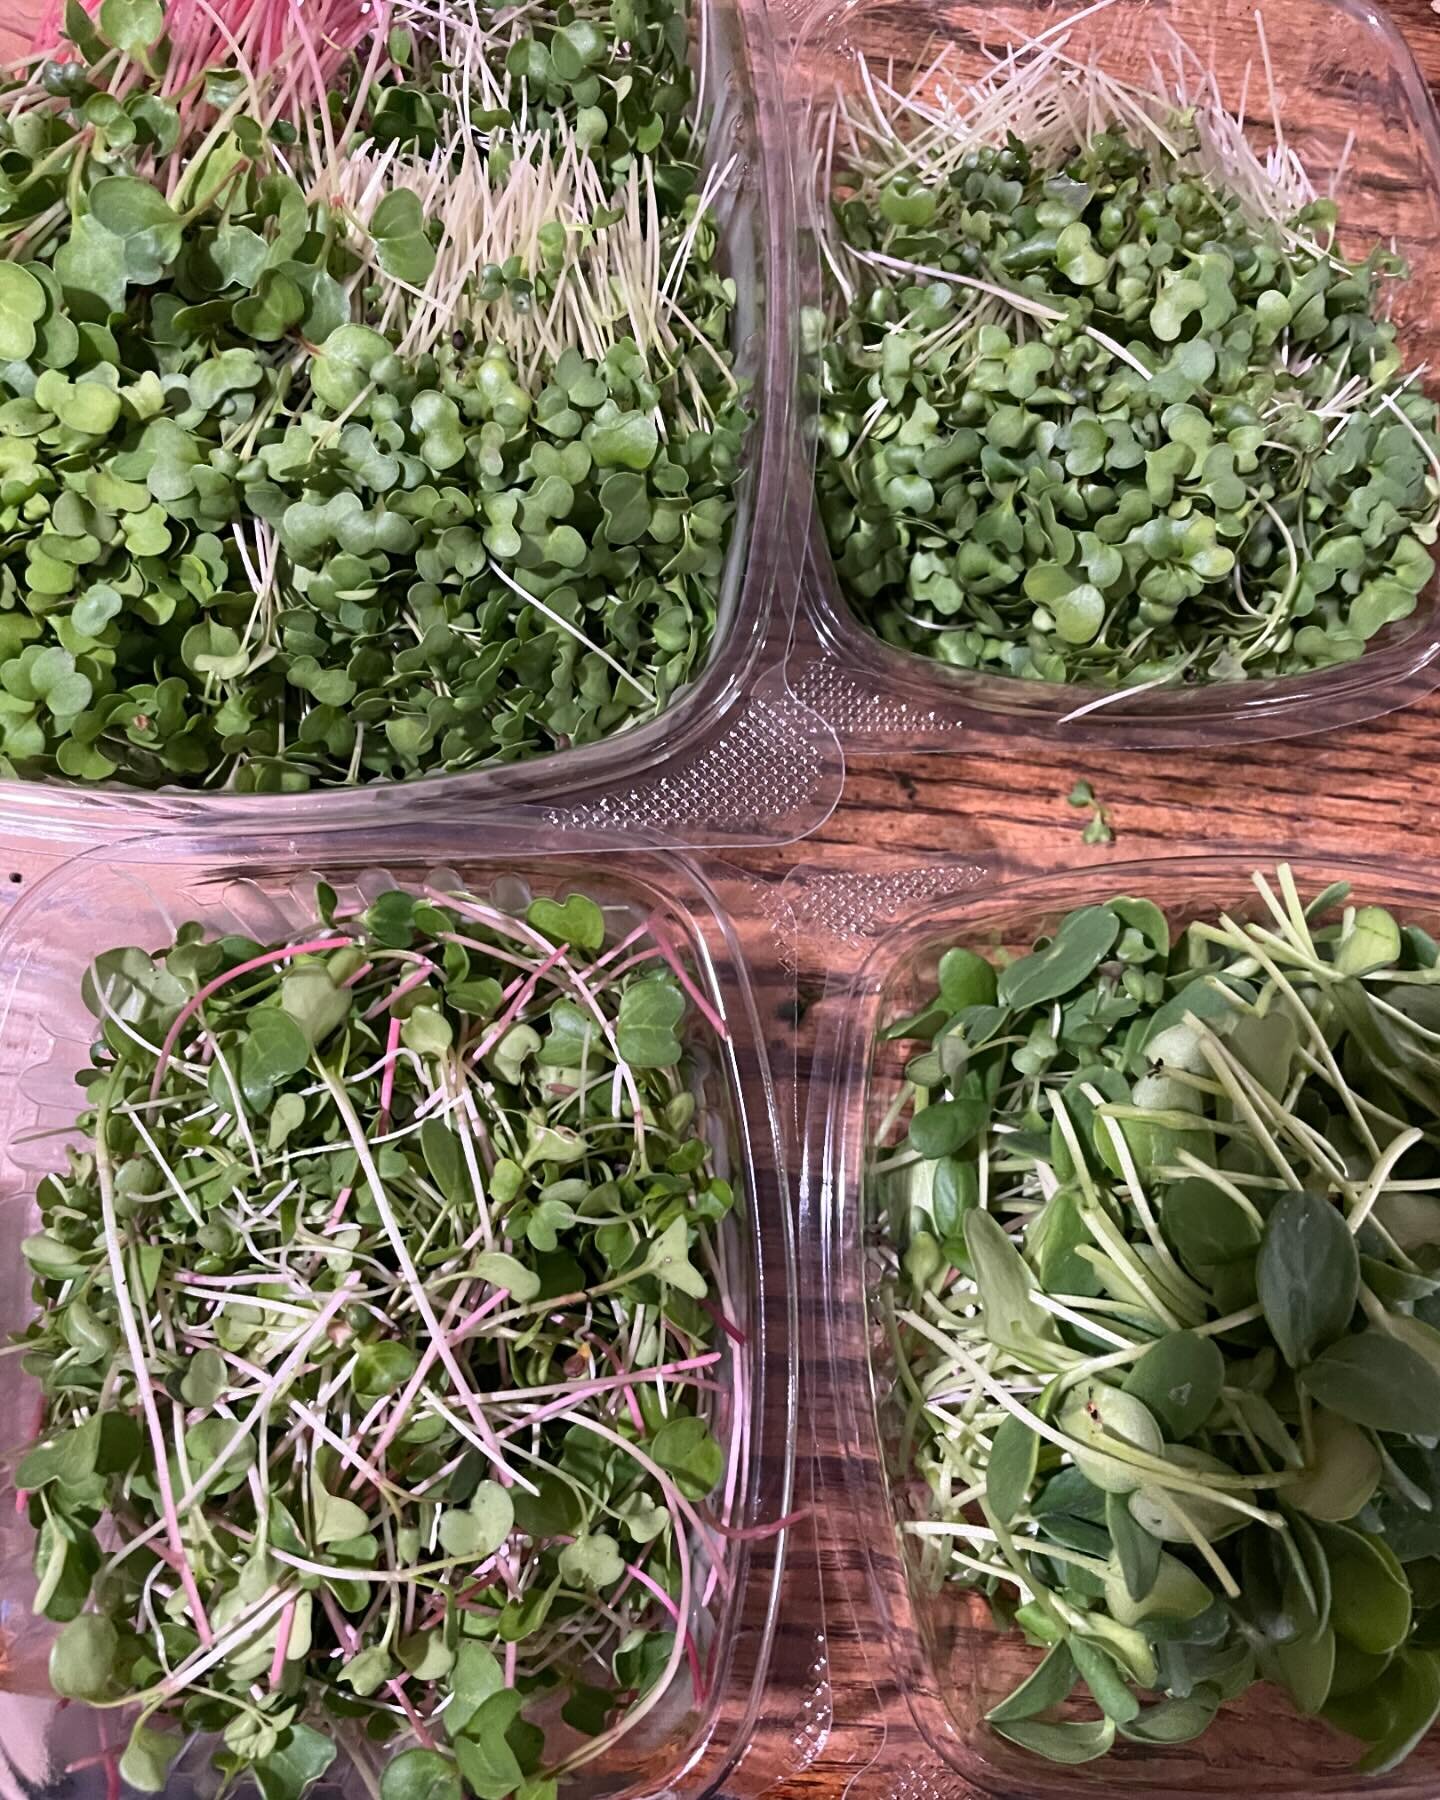 We will be at @farmersmarketatix tomorrow rain or shine!
.
.
Come support us and grab mocrogeeens and frozen pizza!
.
.
Varieties of pizza include cheese pizza, arugula pesto and white pizza with microgreen drizzle.
.
.
For Microgreens we will have s